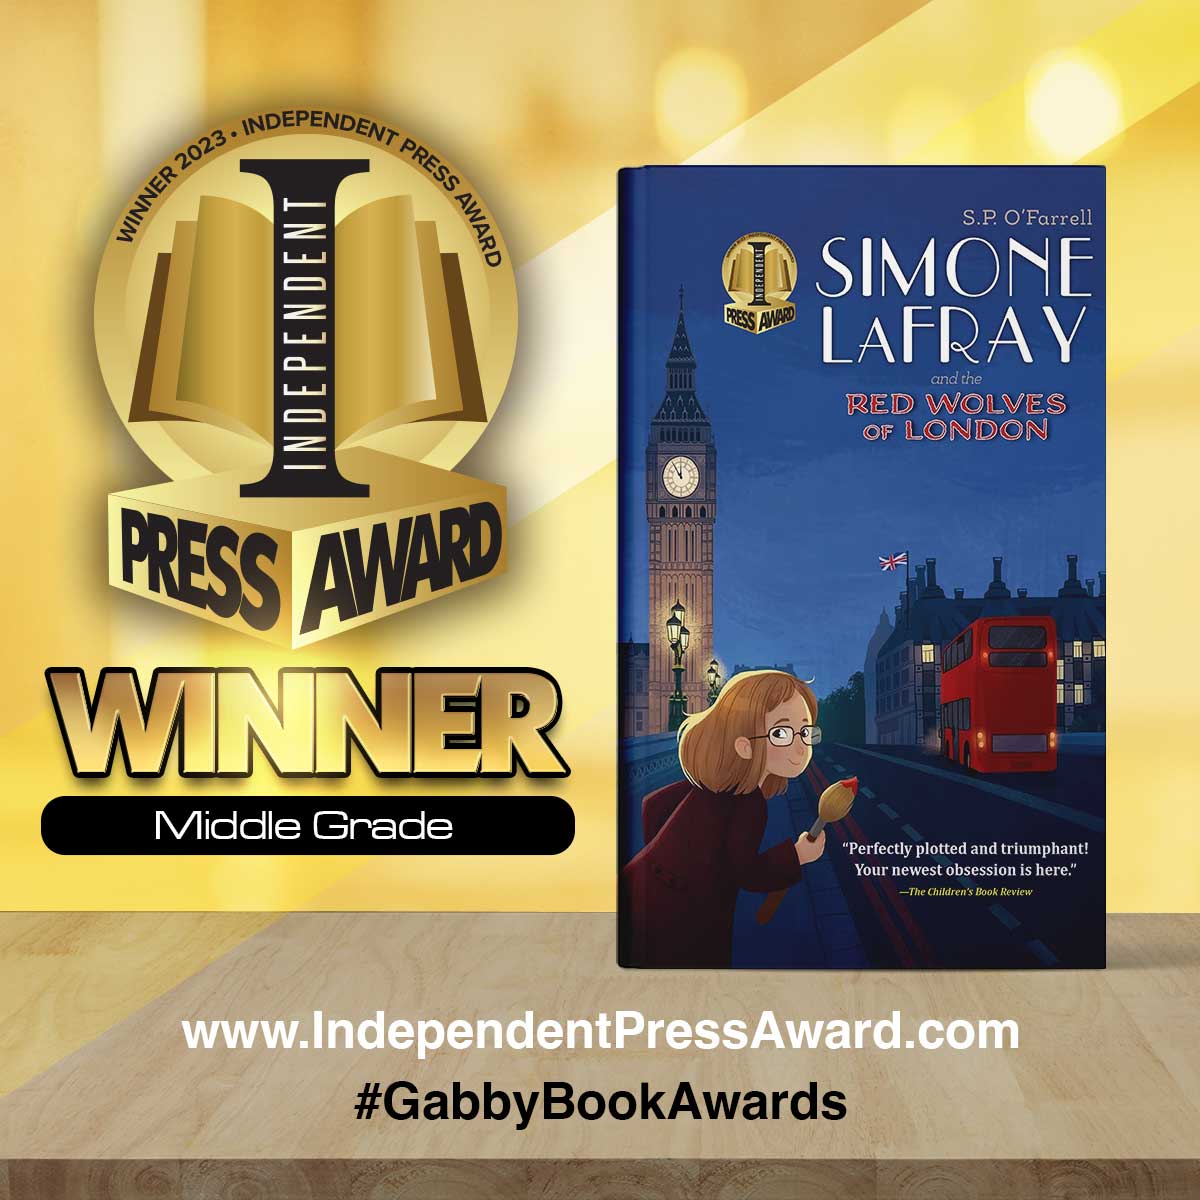 After her triumph at the Chocolatiers' Ball, Simone LaFray wants to fade into the shadows and avoid her newfound popularity-but it is not to be. 

In this second book of the Simone LaFray Mysteries, Simone navigates school rivalries, oversees the opening of a new LaFray's…